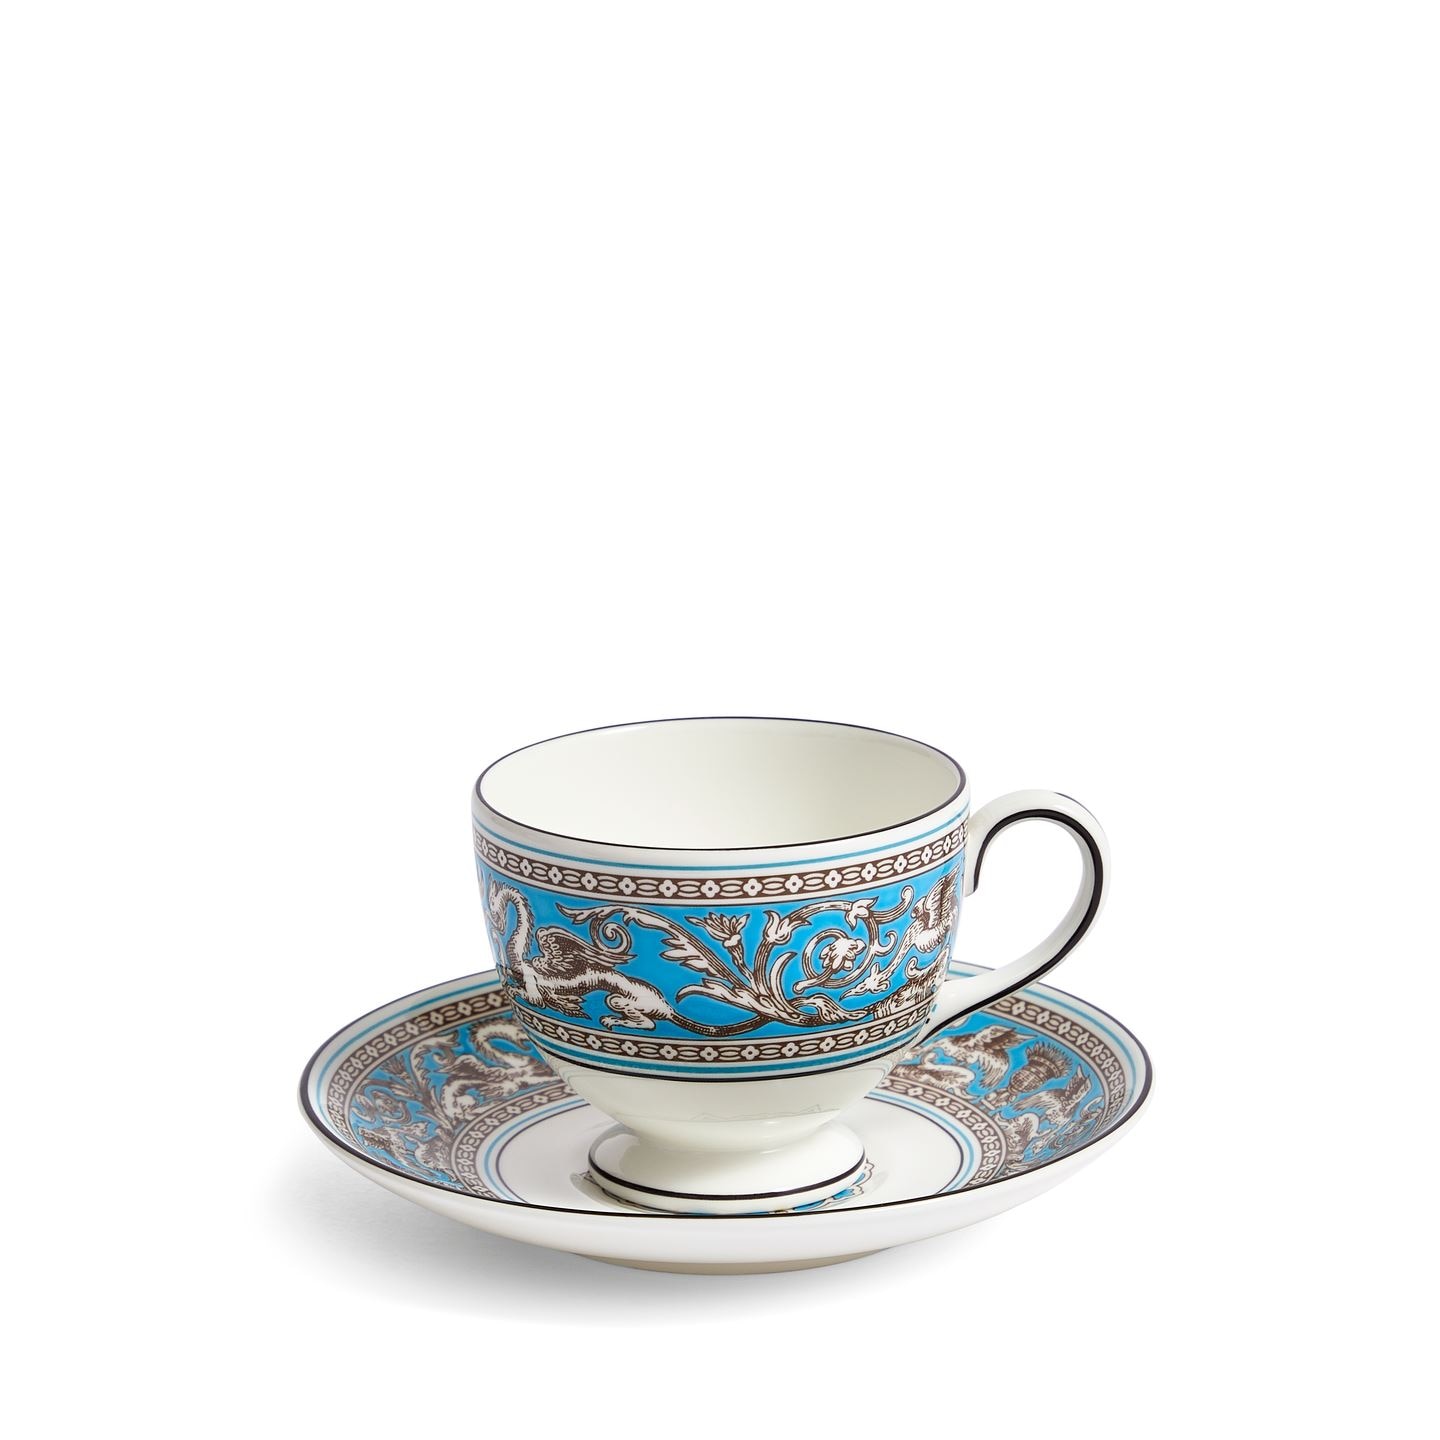 Florentine Turquoise Leigh Teacup and Saucer